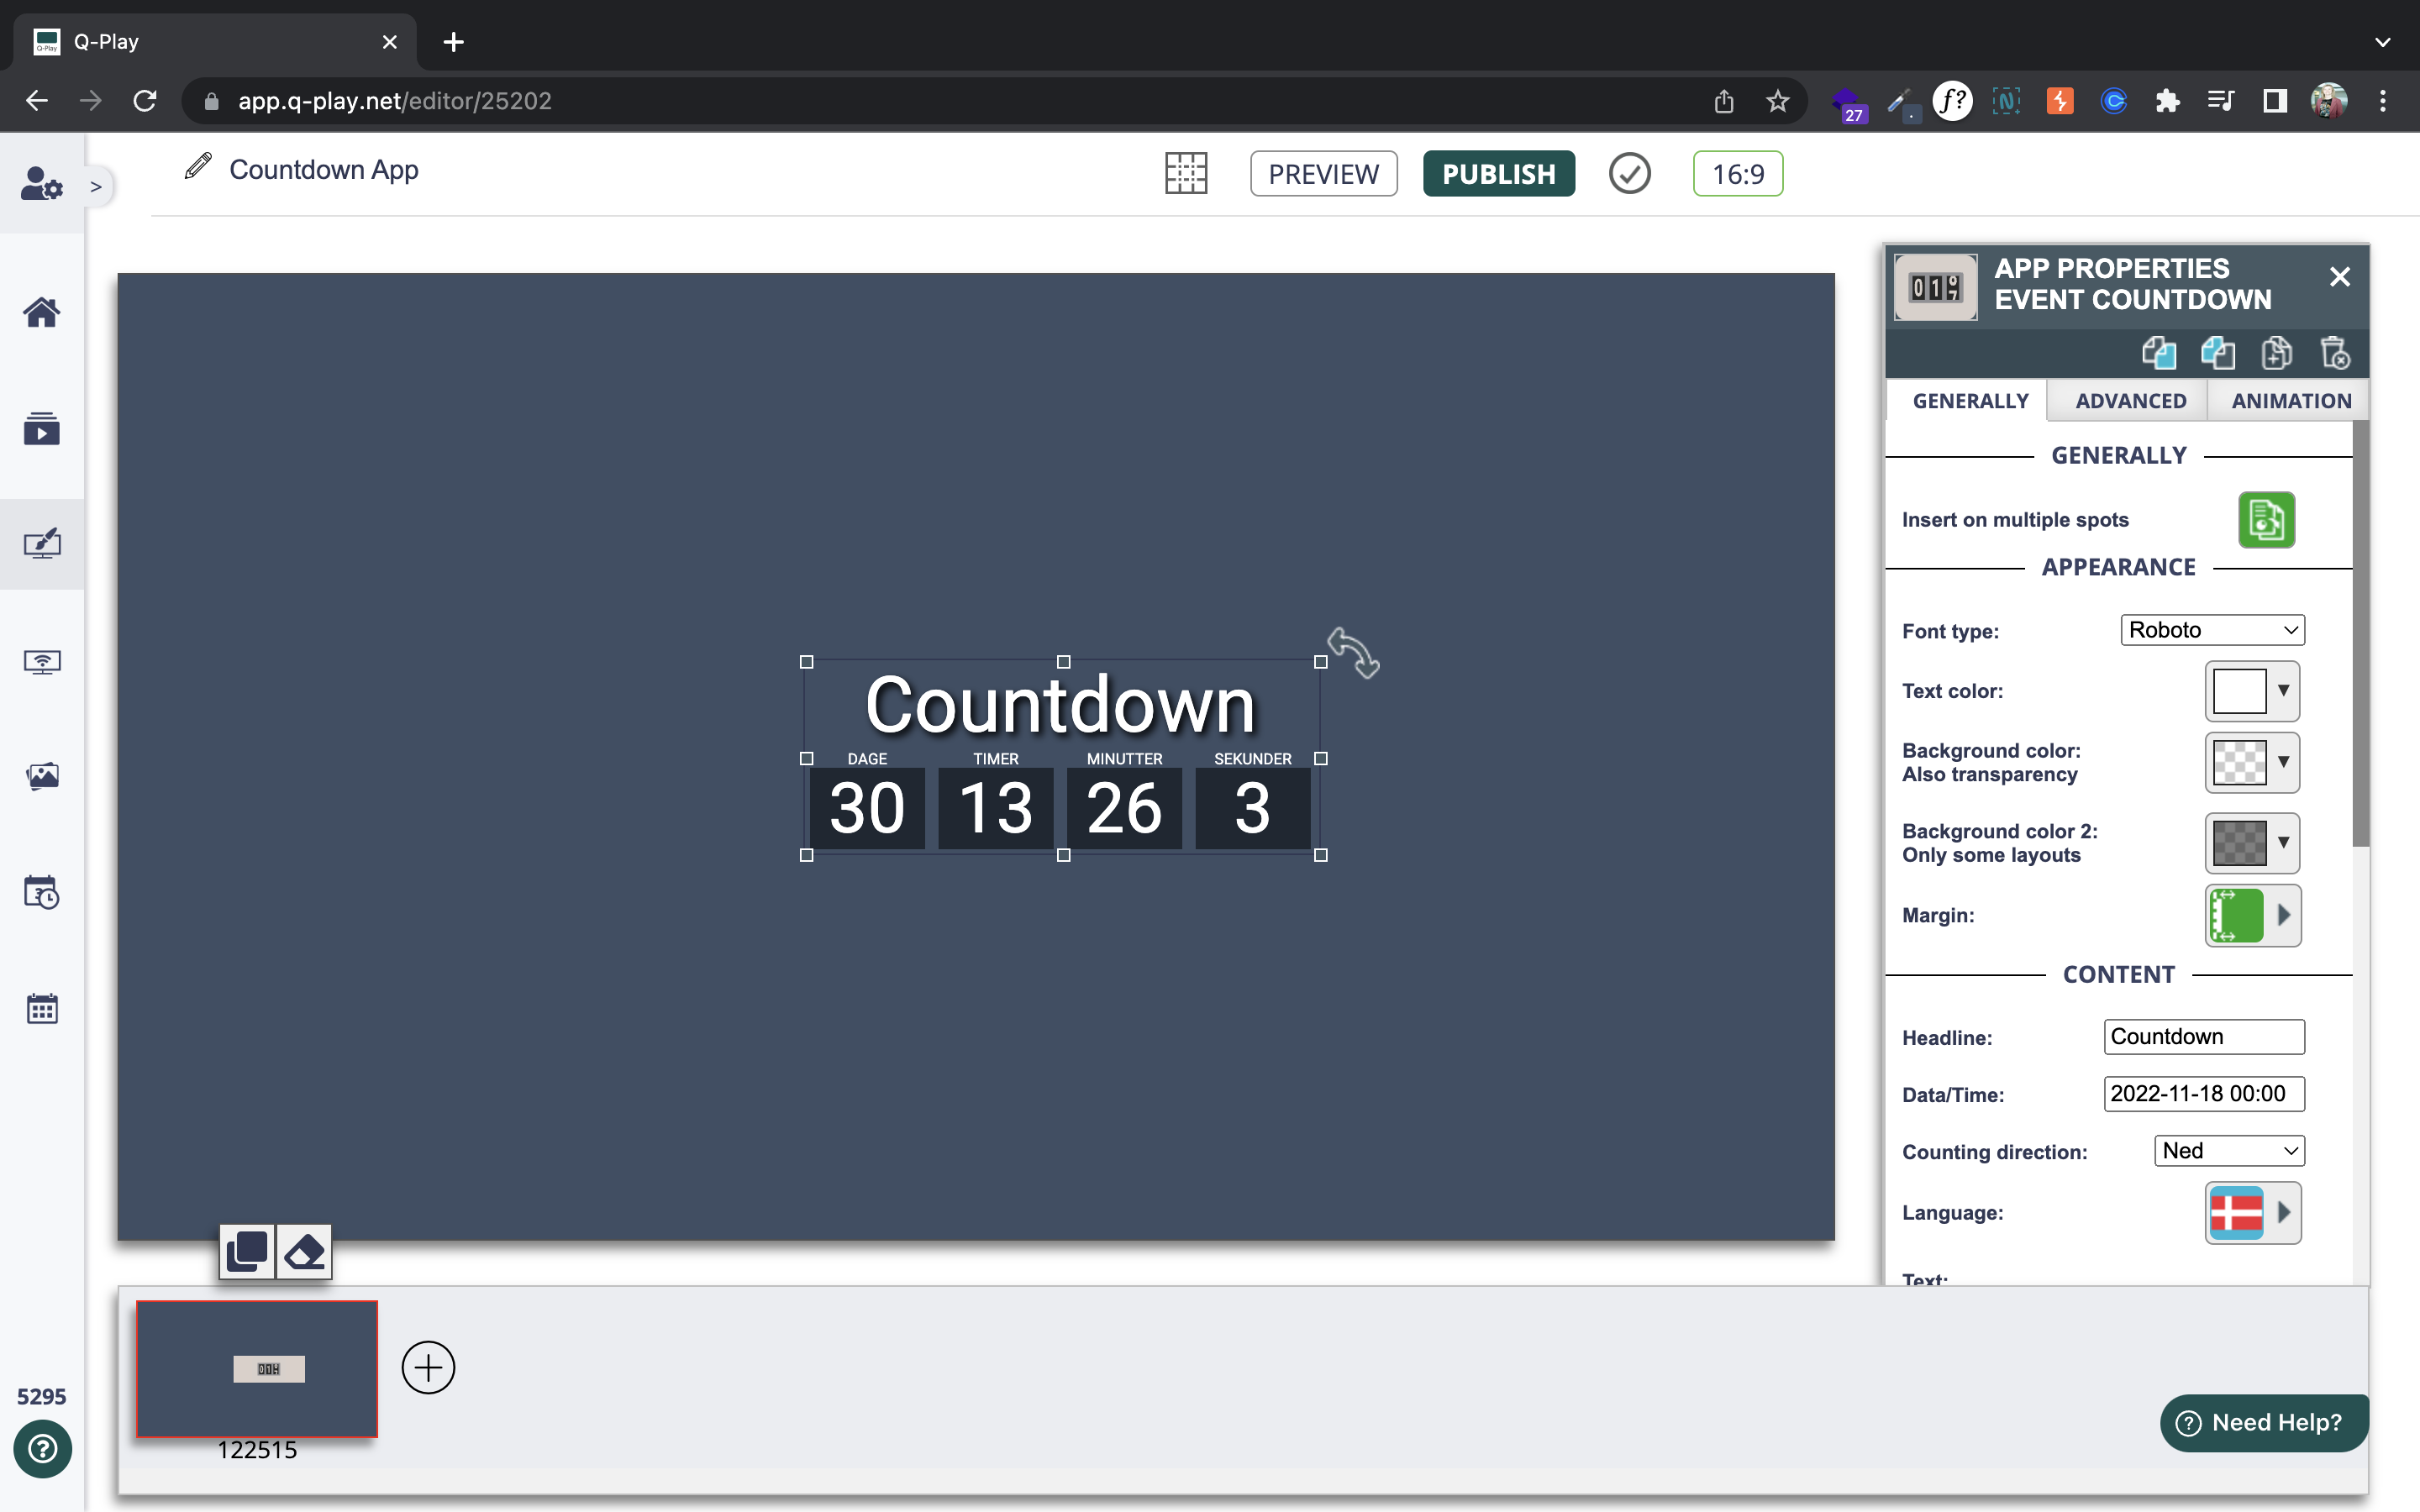 Editing interface showing a countdown timer with 30 days, 13 hours, 26 minutes, and 3 seconds remaining.